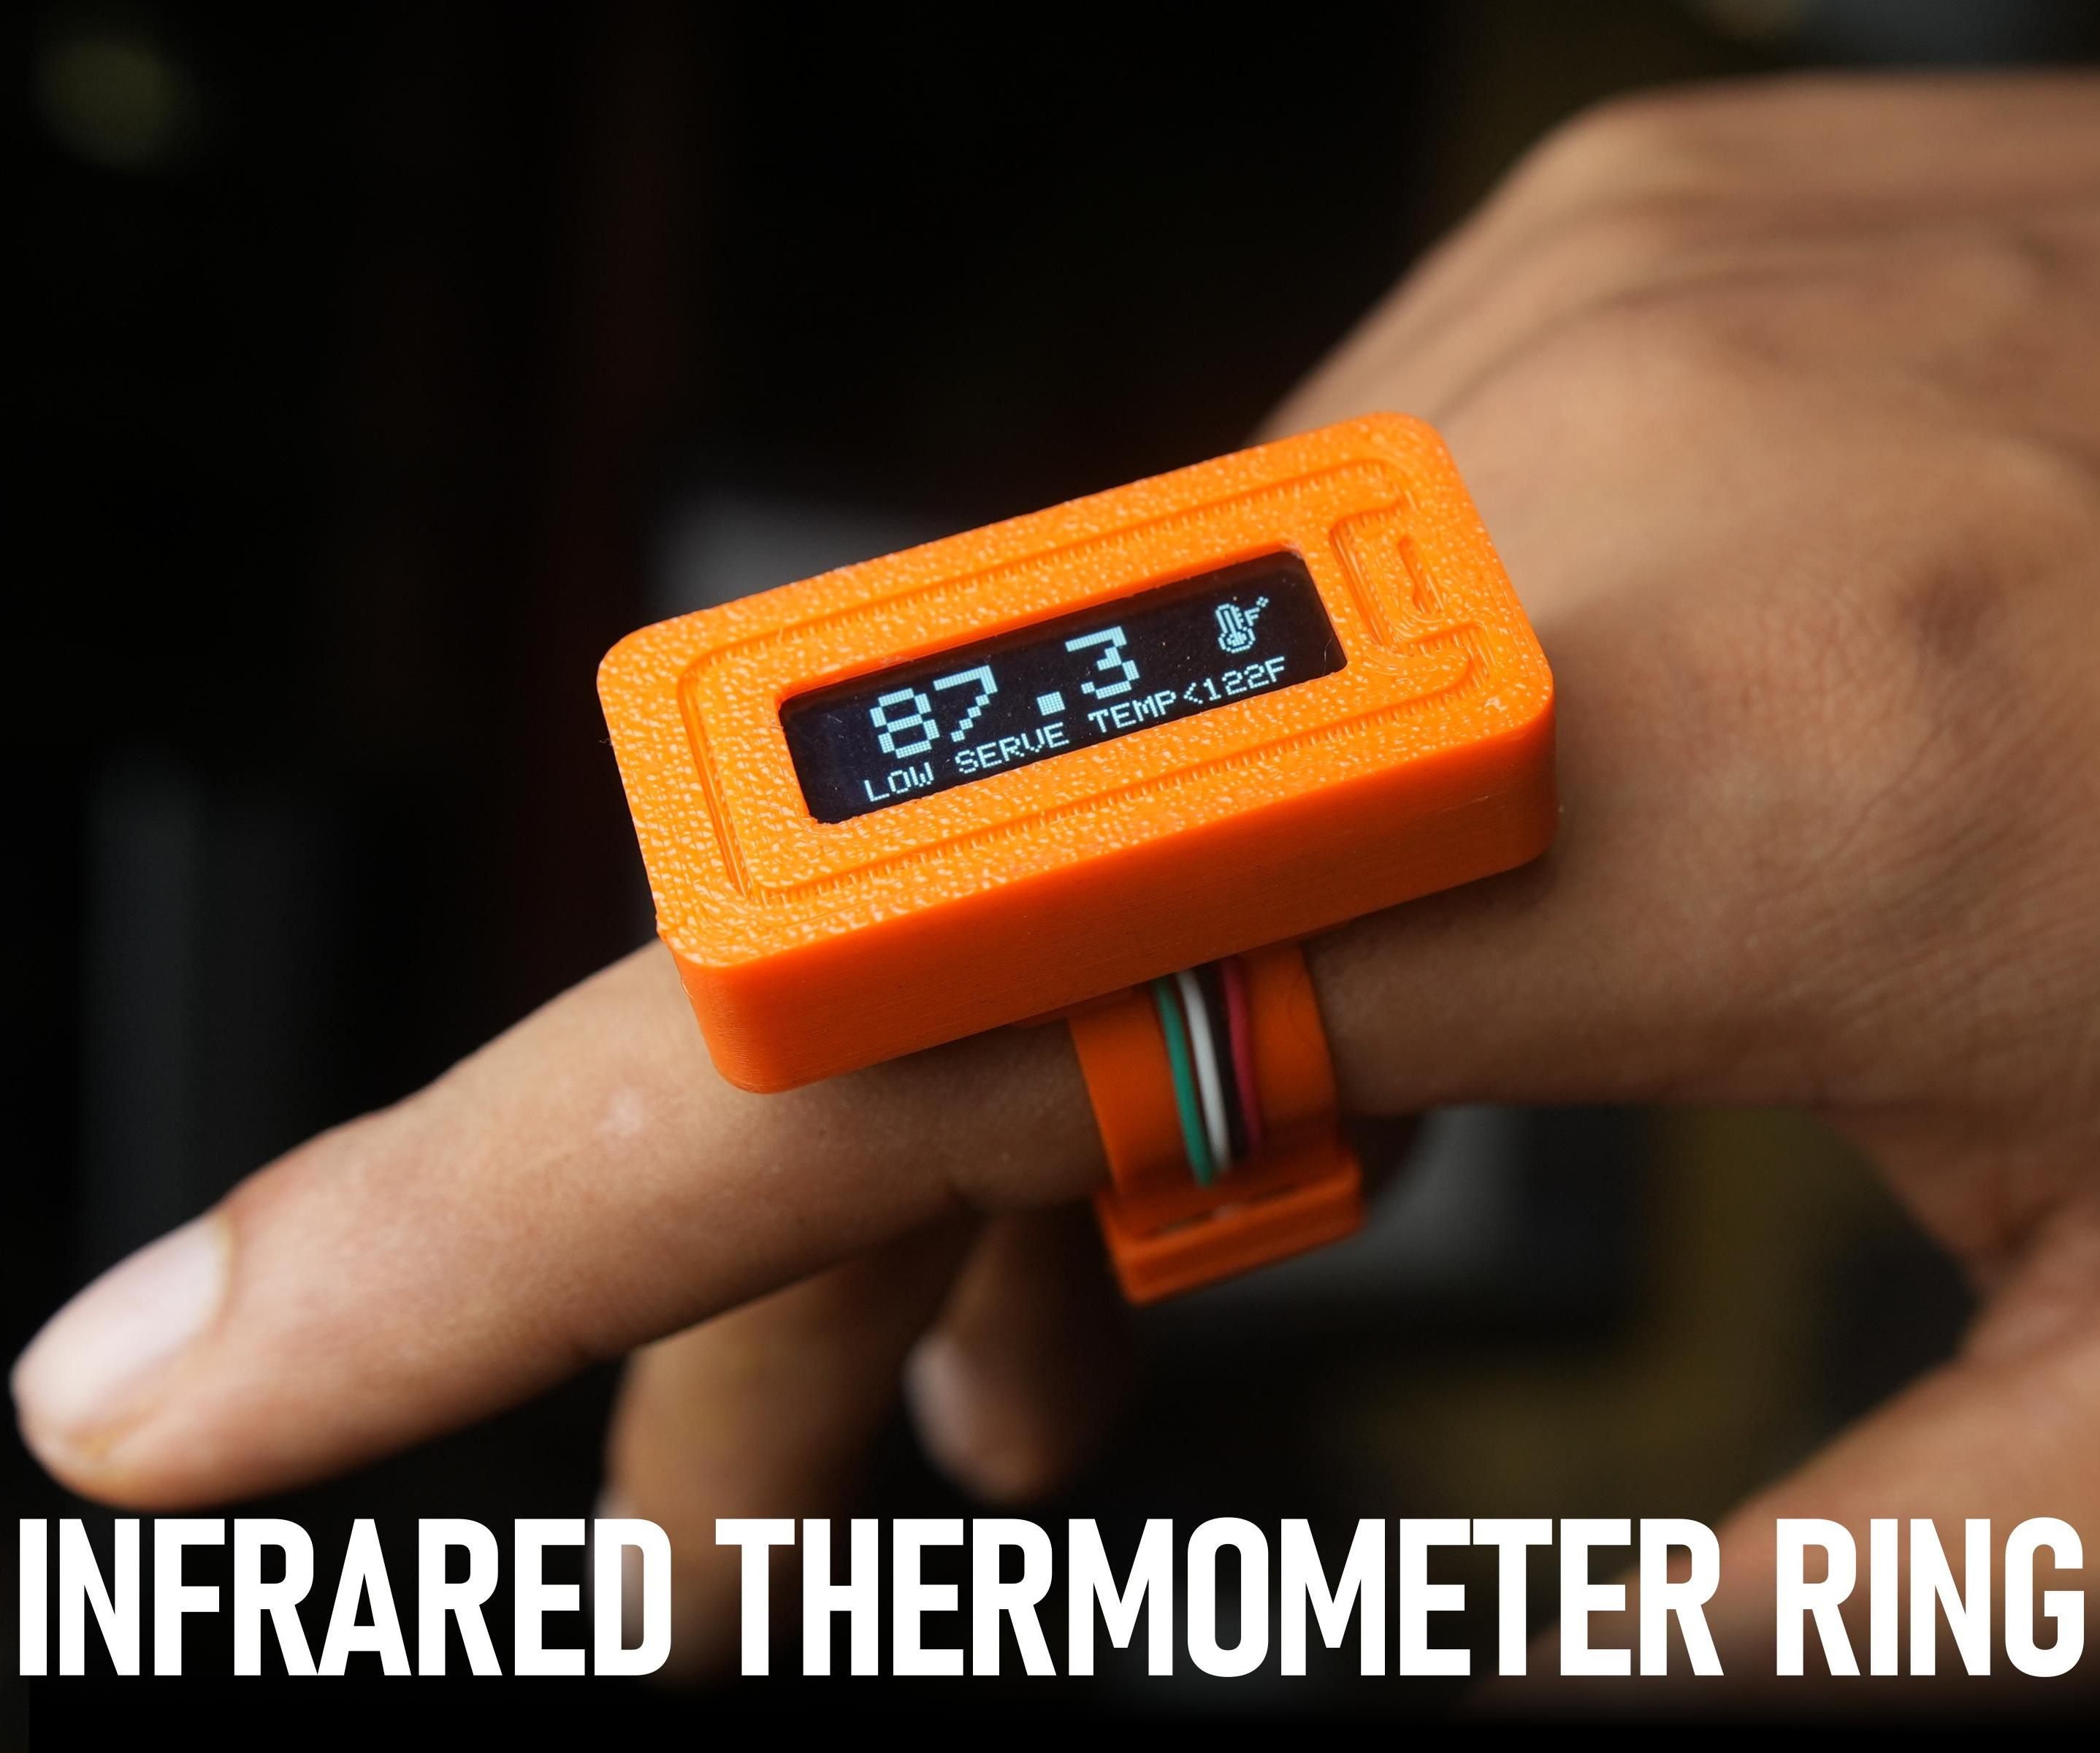 Infrared Thermometer Ring - But It's More Than You Think !!